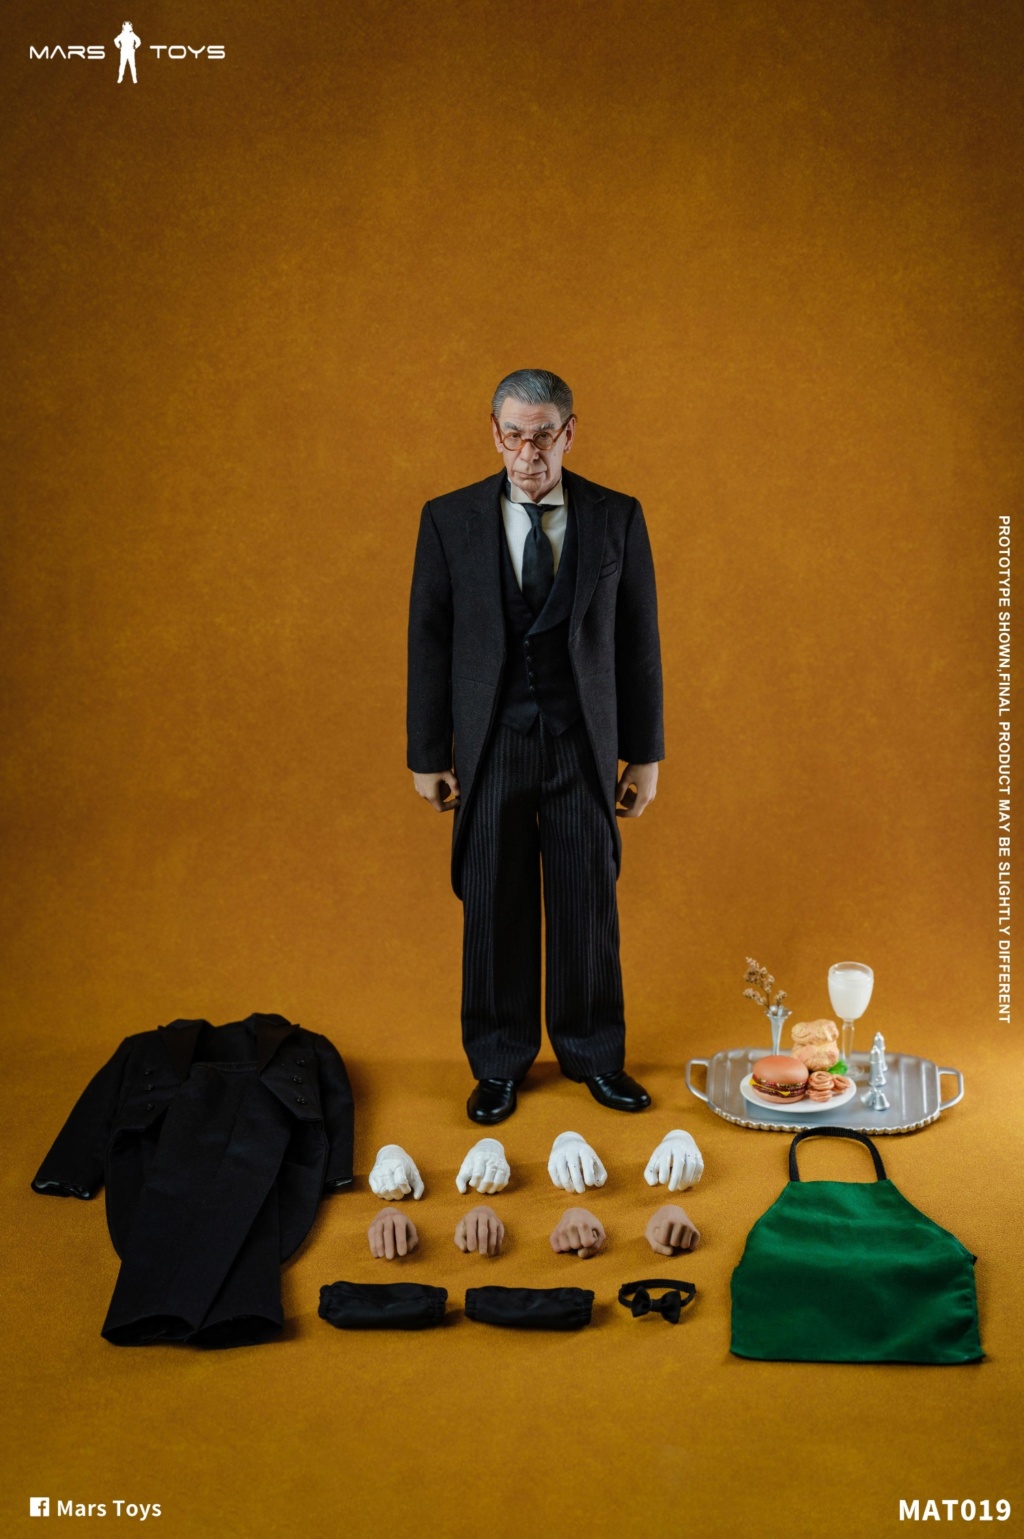 Comicbook - NEW PRODUCT: Mars Toys: 1/6 Old Housekeeper Mr.A Action Figure MAT019 47011110